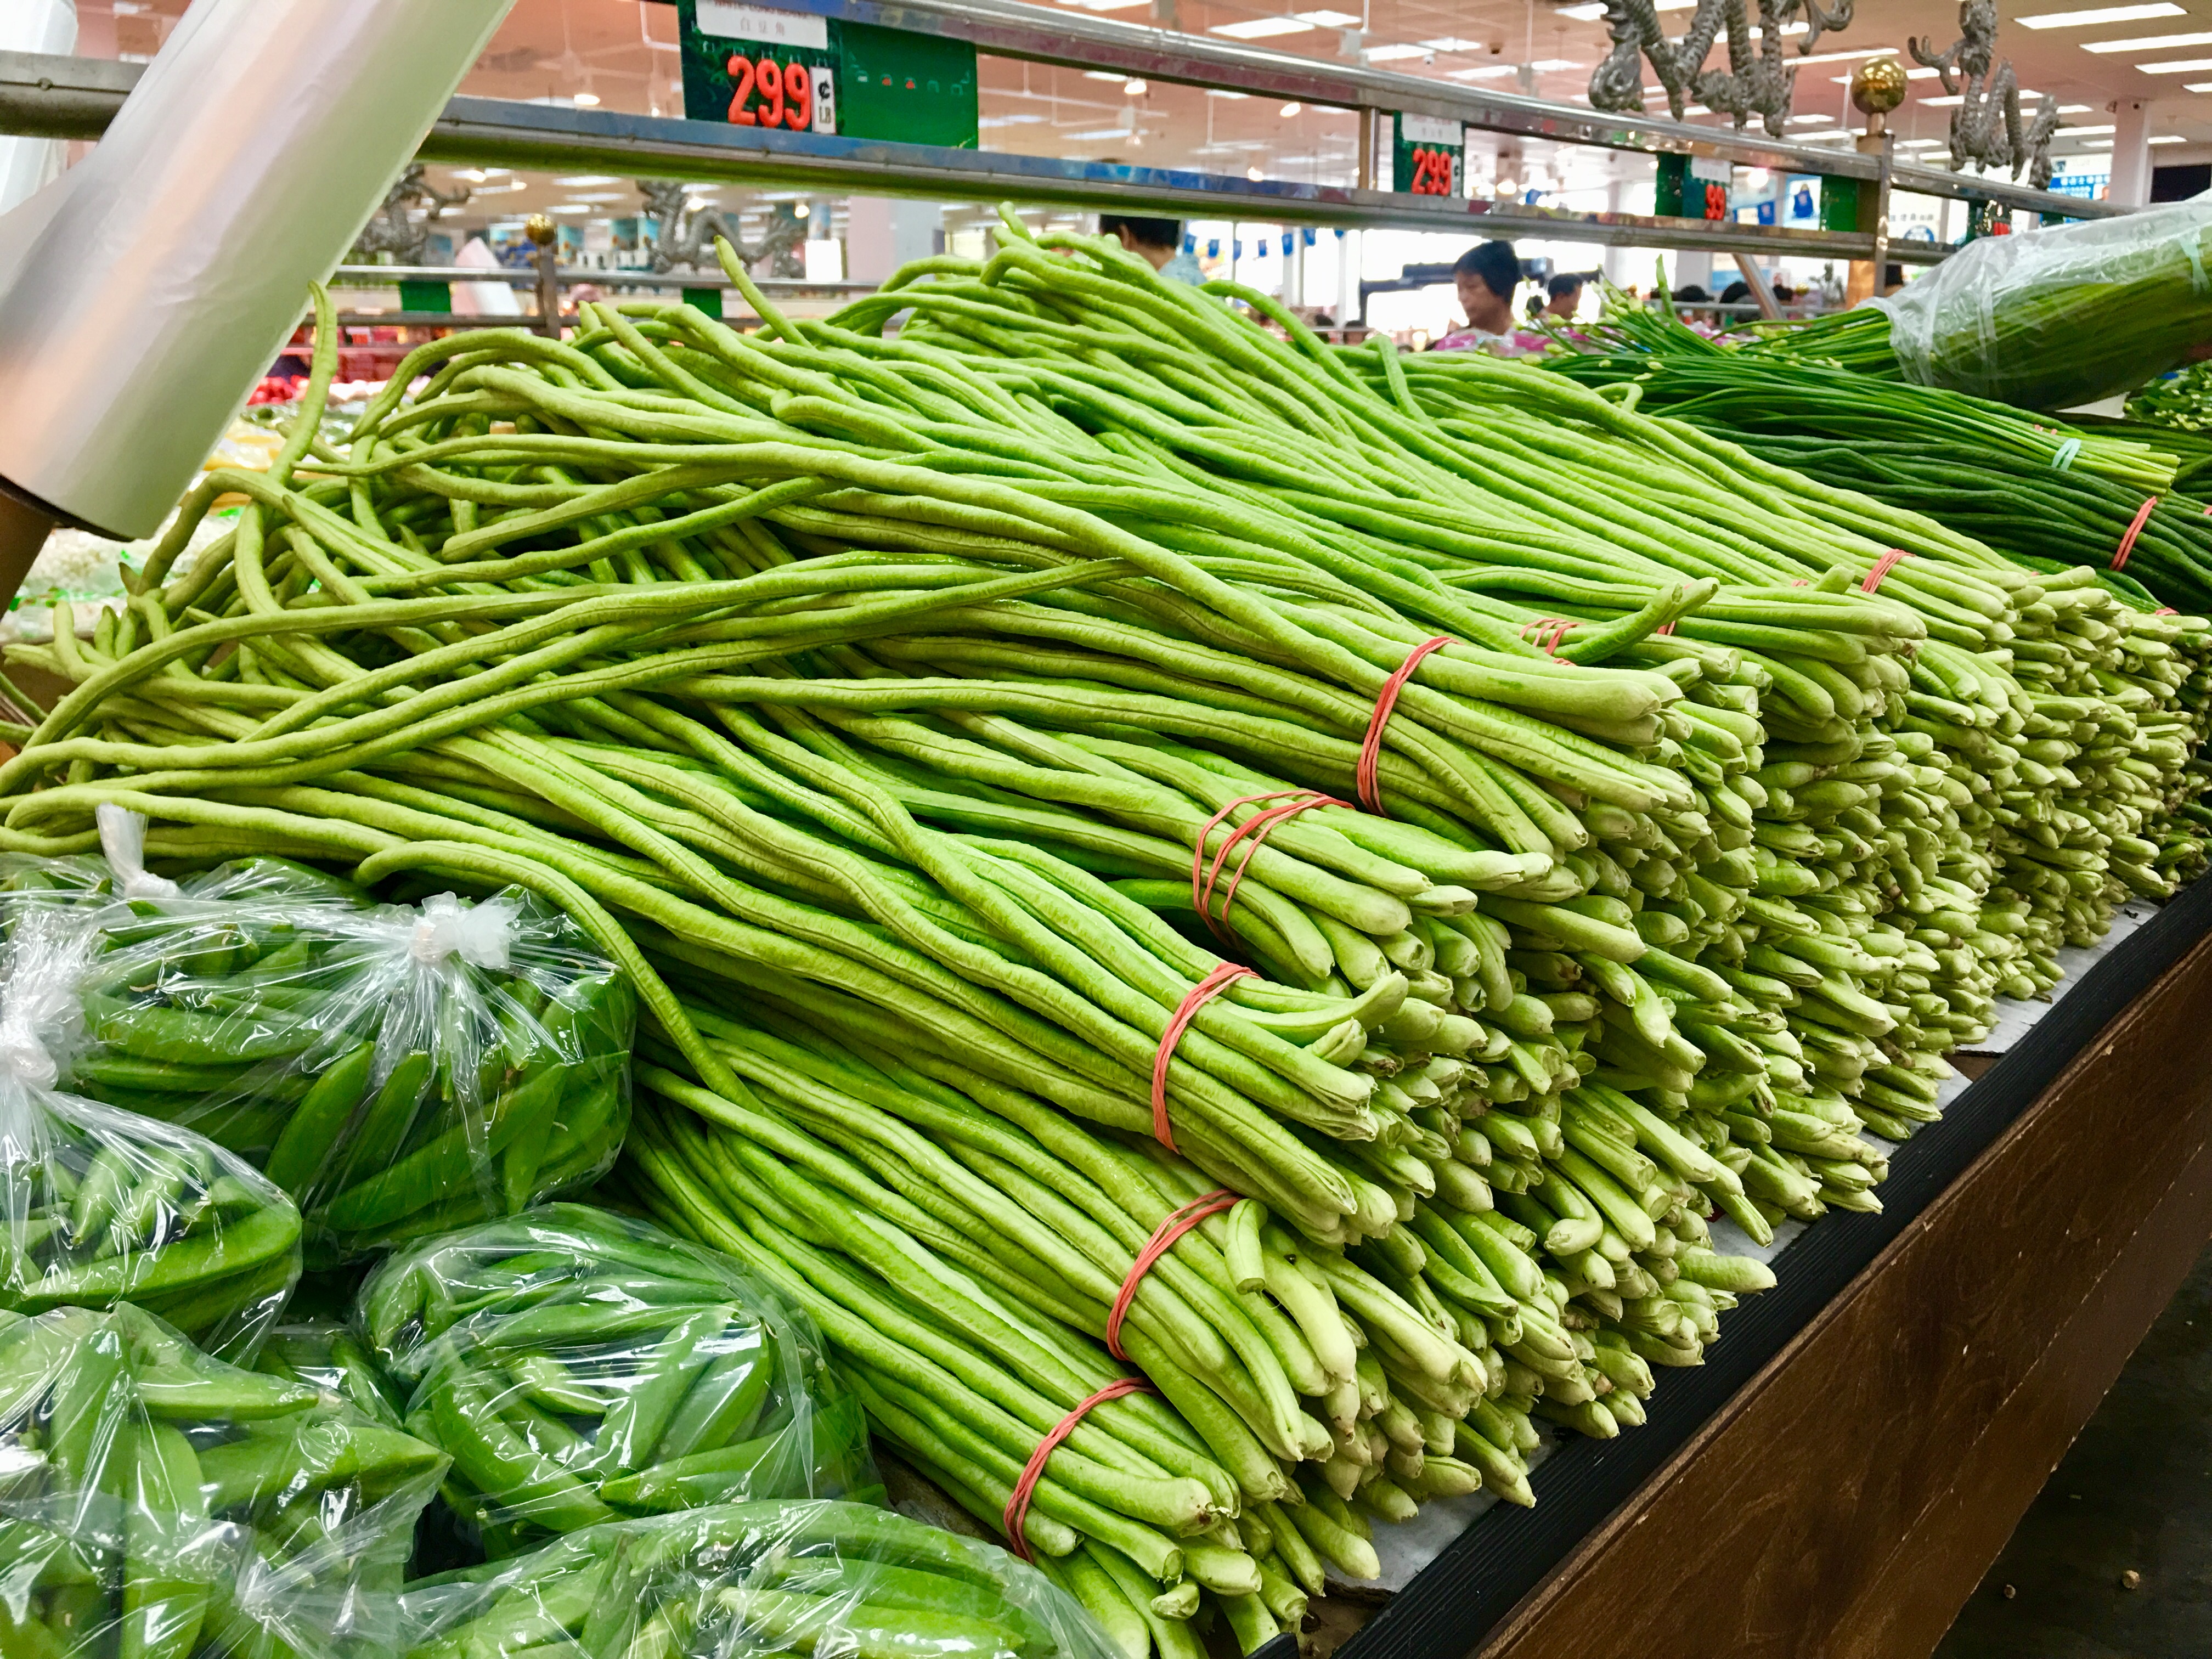 Eye-catching green beans at Fei Long Market. Eagle photo by Lore Croghan